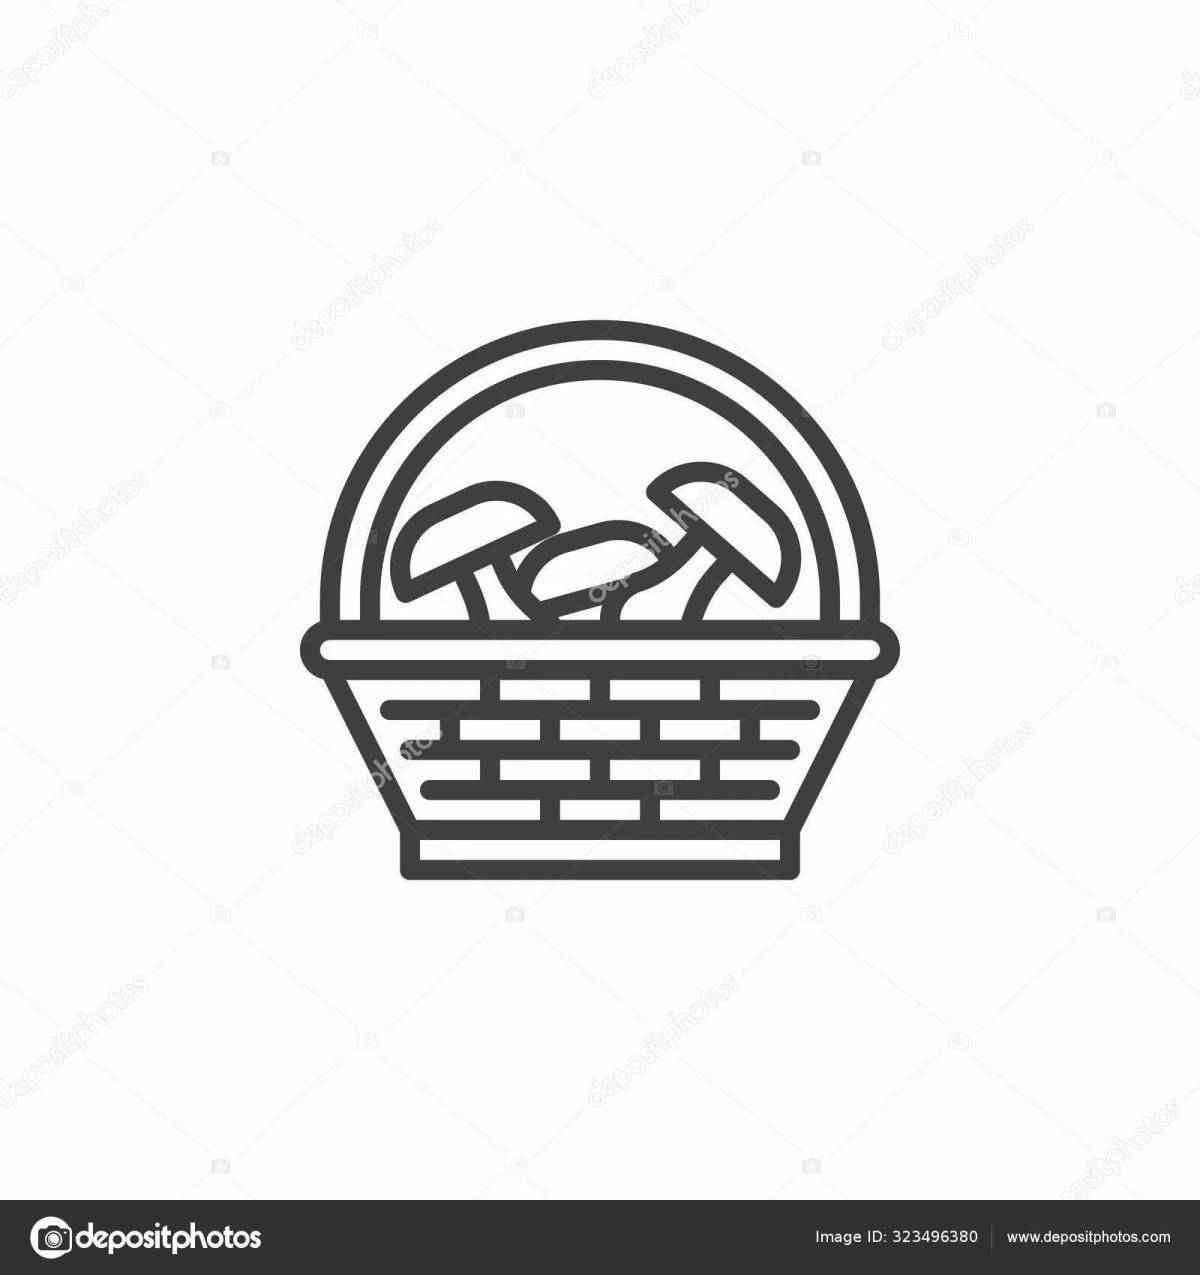 Coloring page awesome mushroom basket